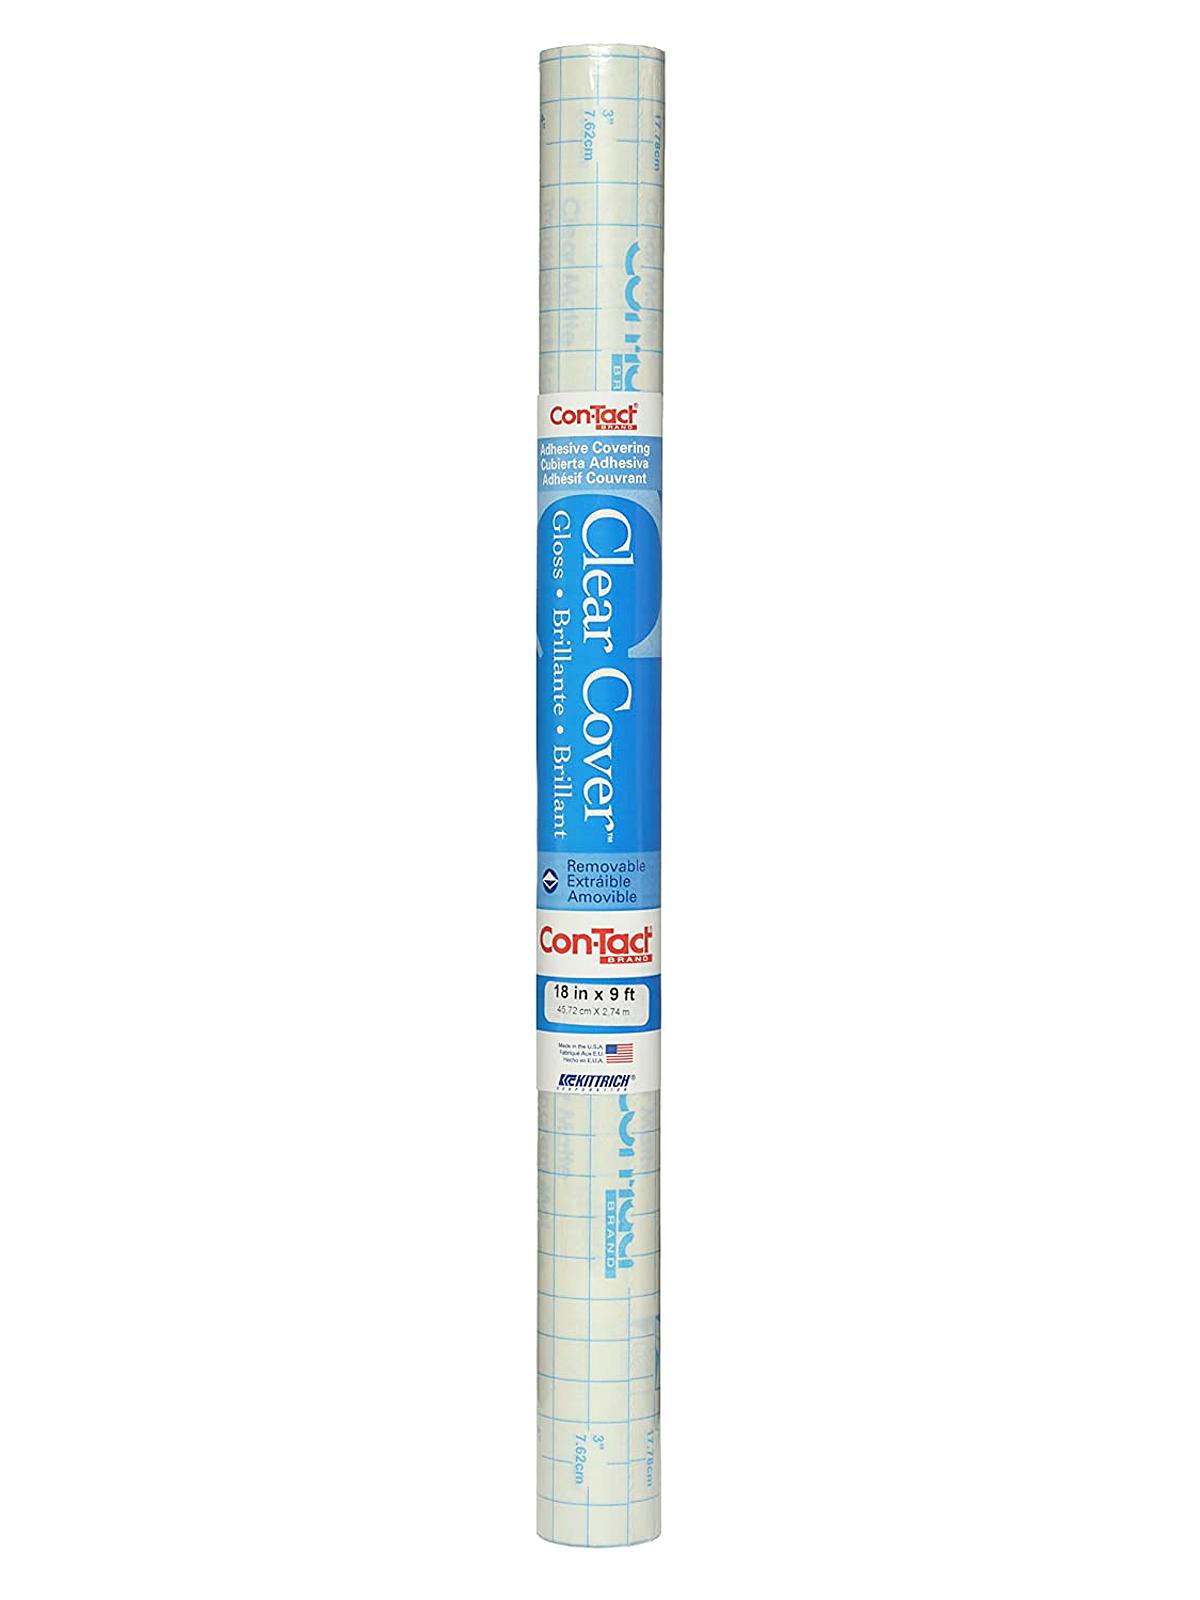 Clear Self Adhesive Laminate 18 In. X 9 Ft. Roll